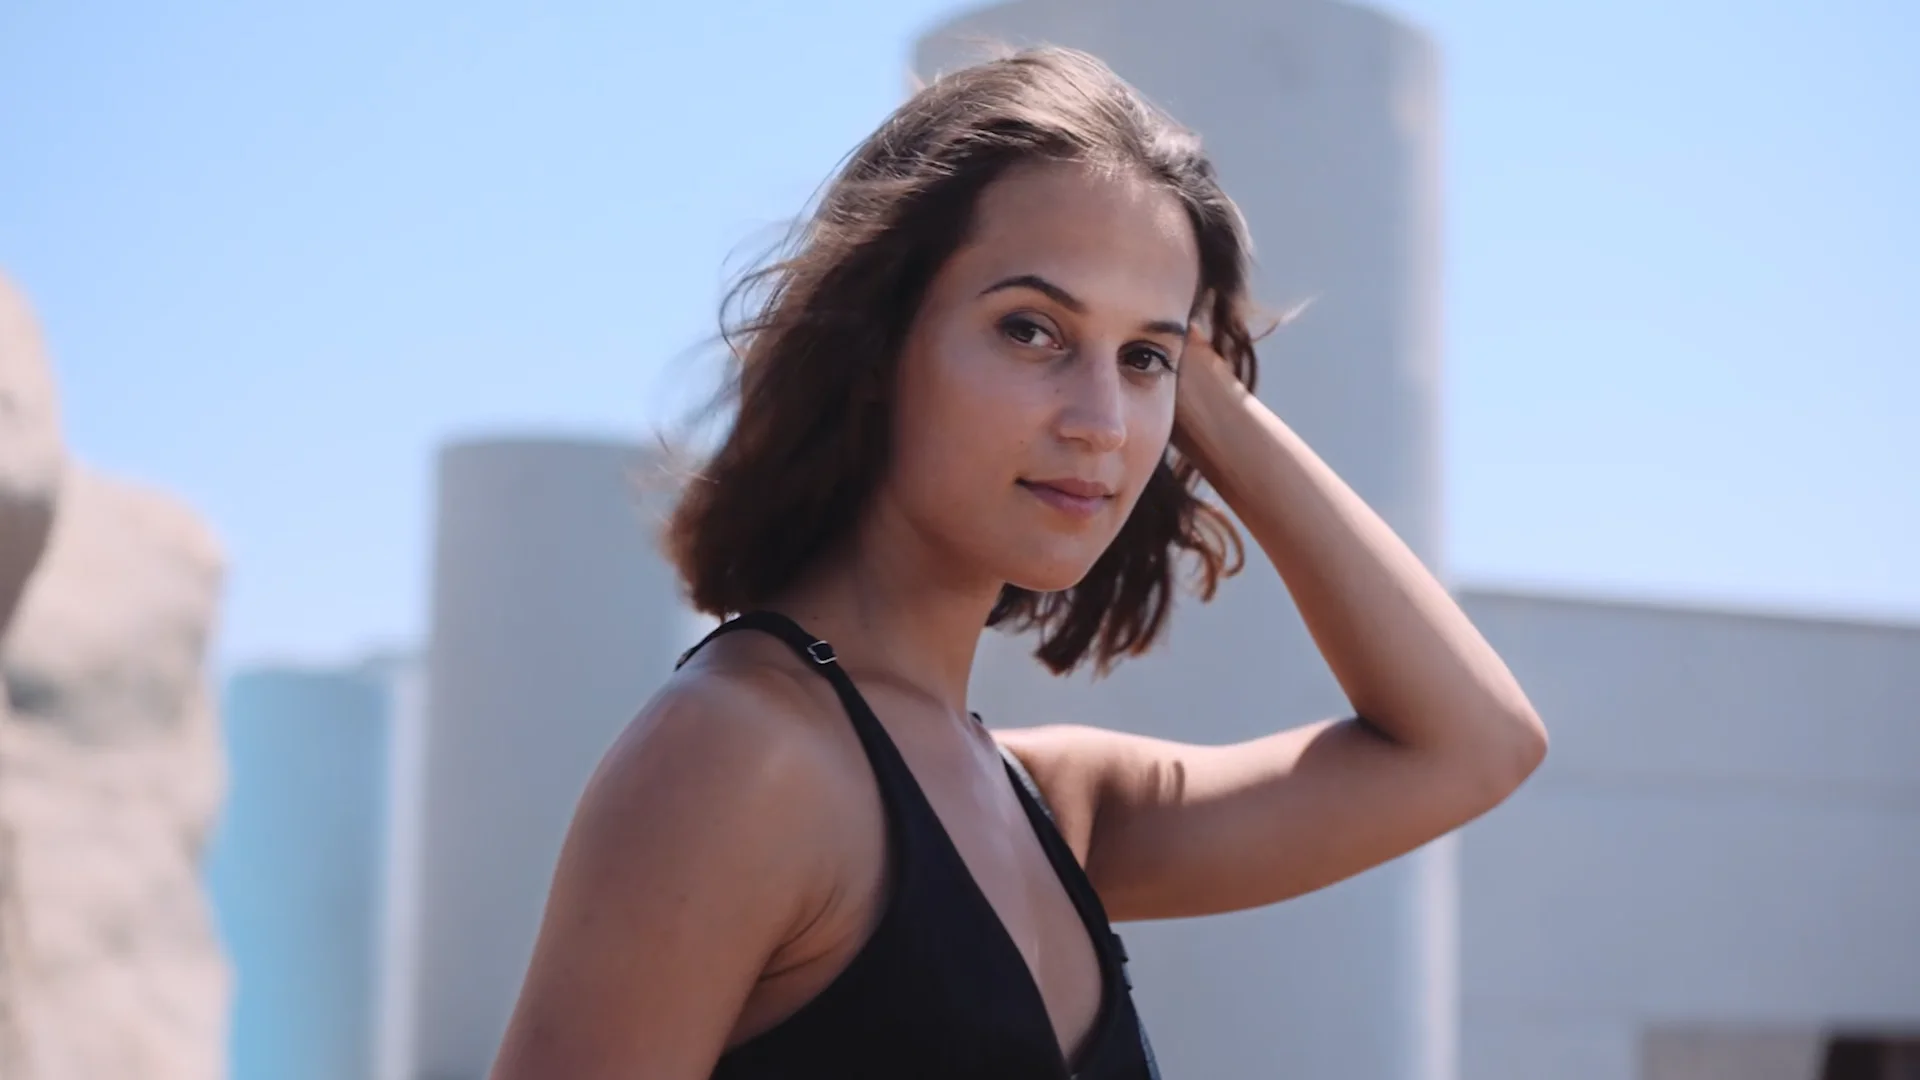 Louis Vuitton Cruise 2018 Collection by Nicolas Ghesquière featuring Alicia  Vikander on Vimeo